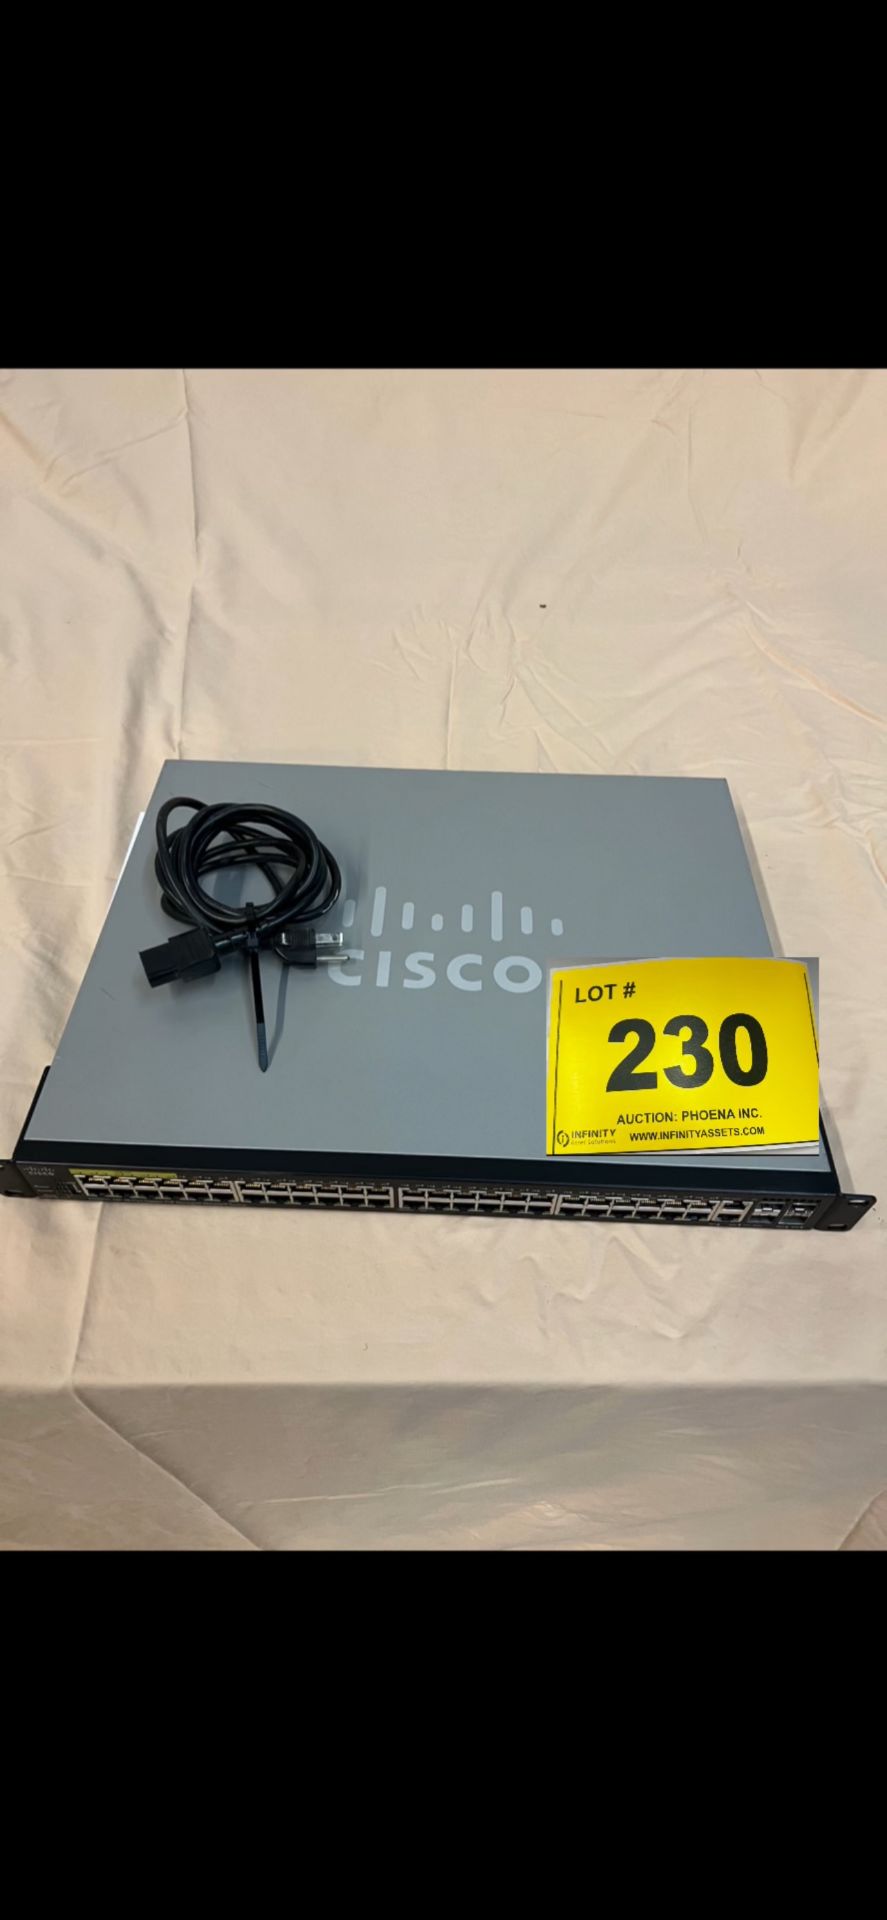 CISCO SG350X-48P 48-PORT GIGABIT POE STACKABLE MANAGED SWITCH, S/N DNI2224082A (LOCATED IN